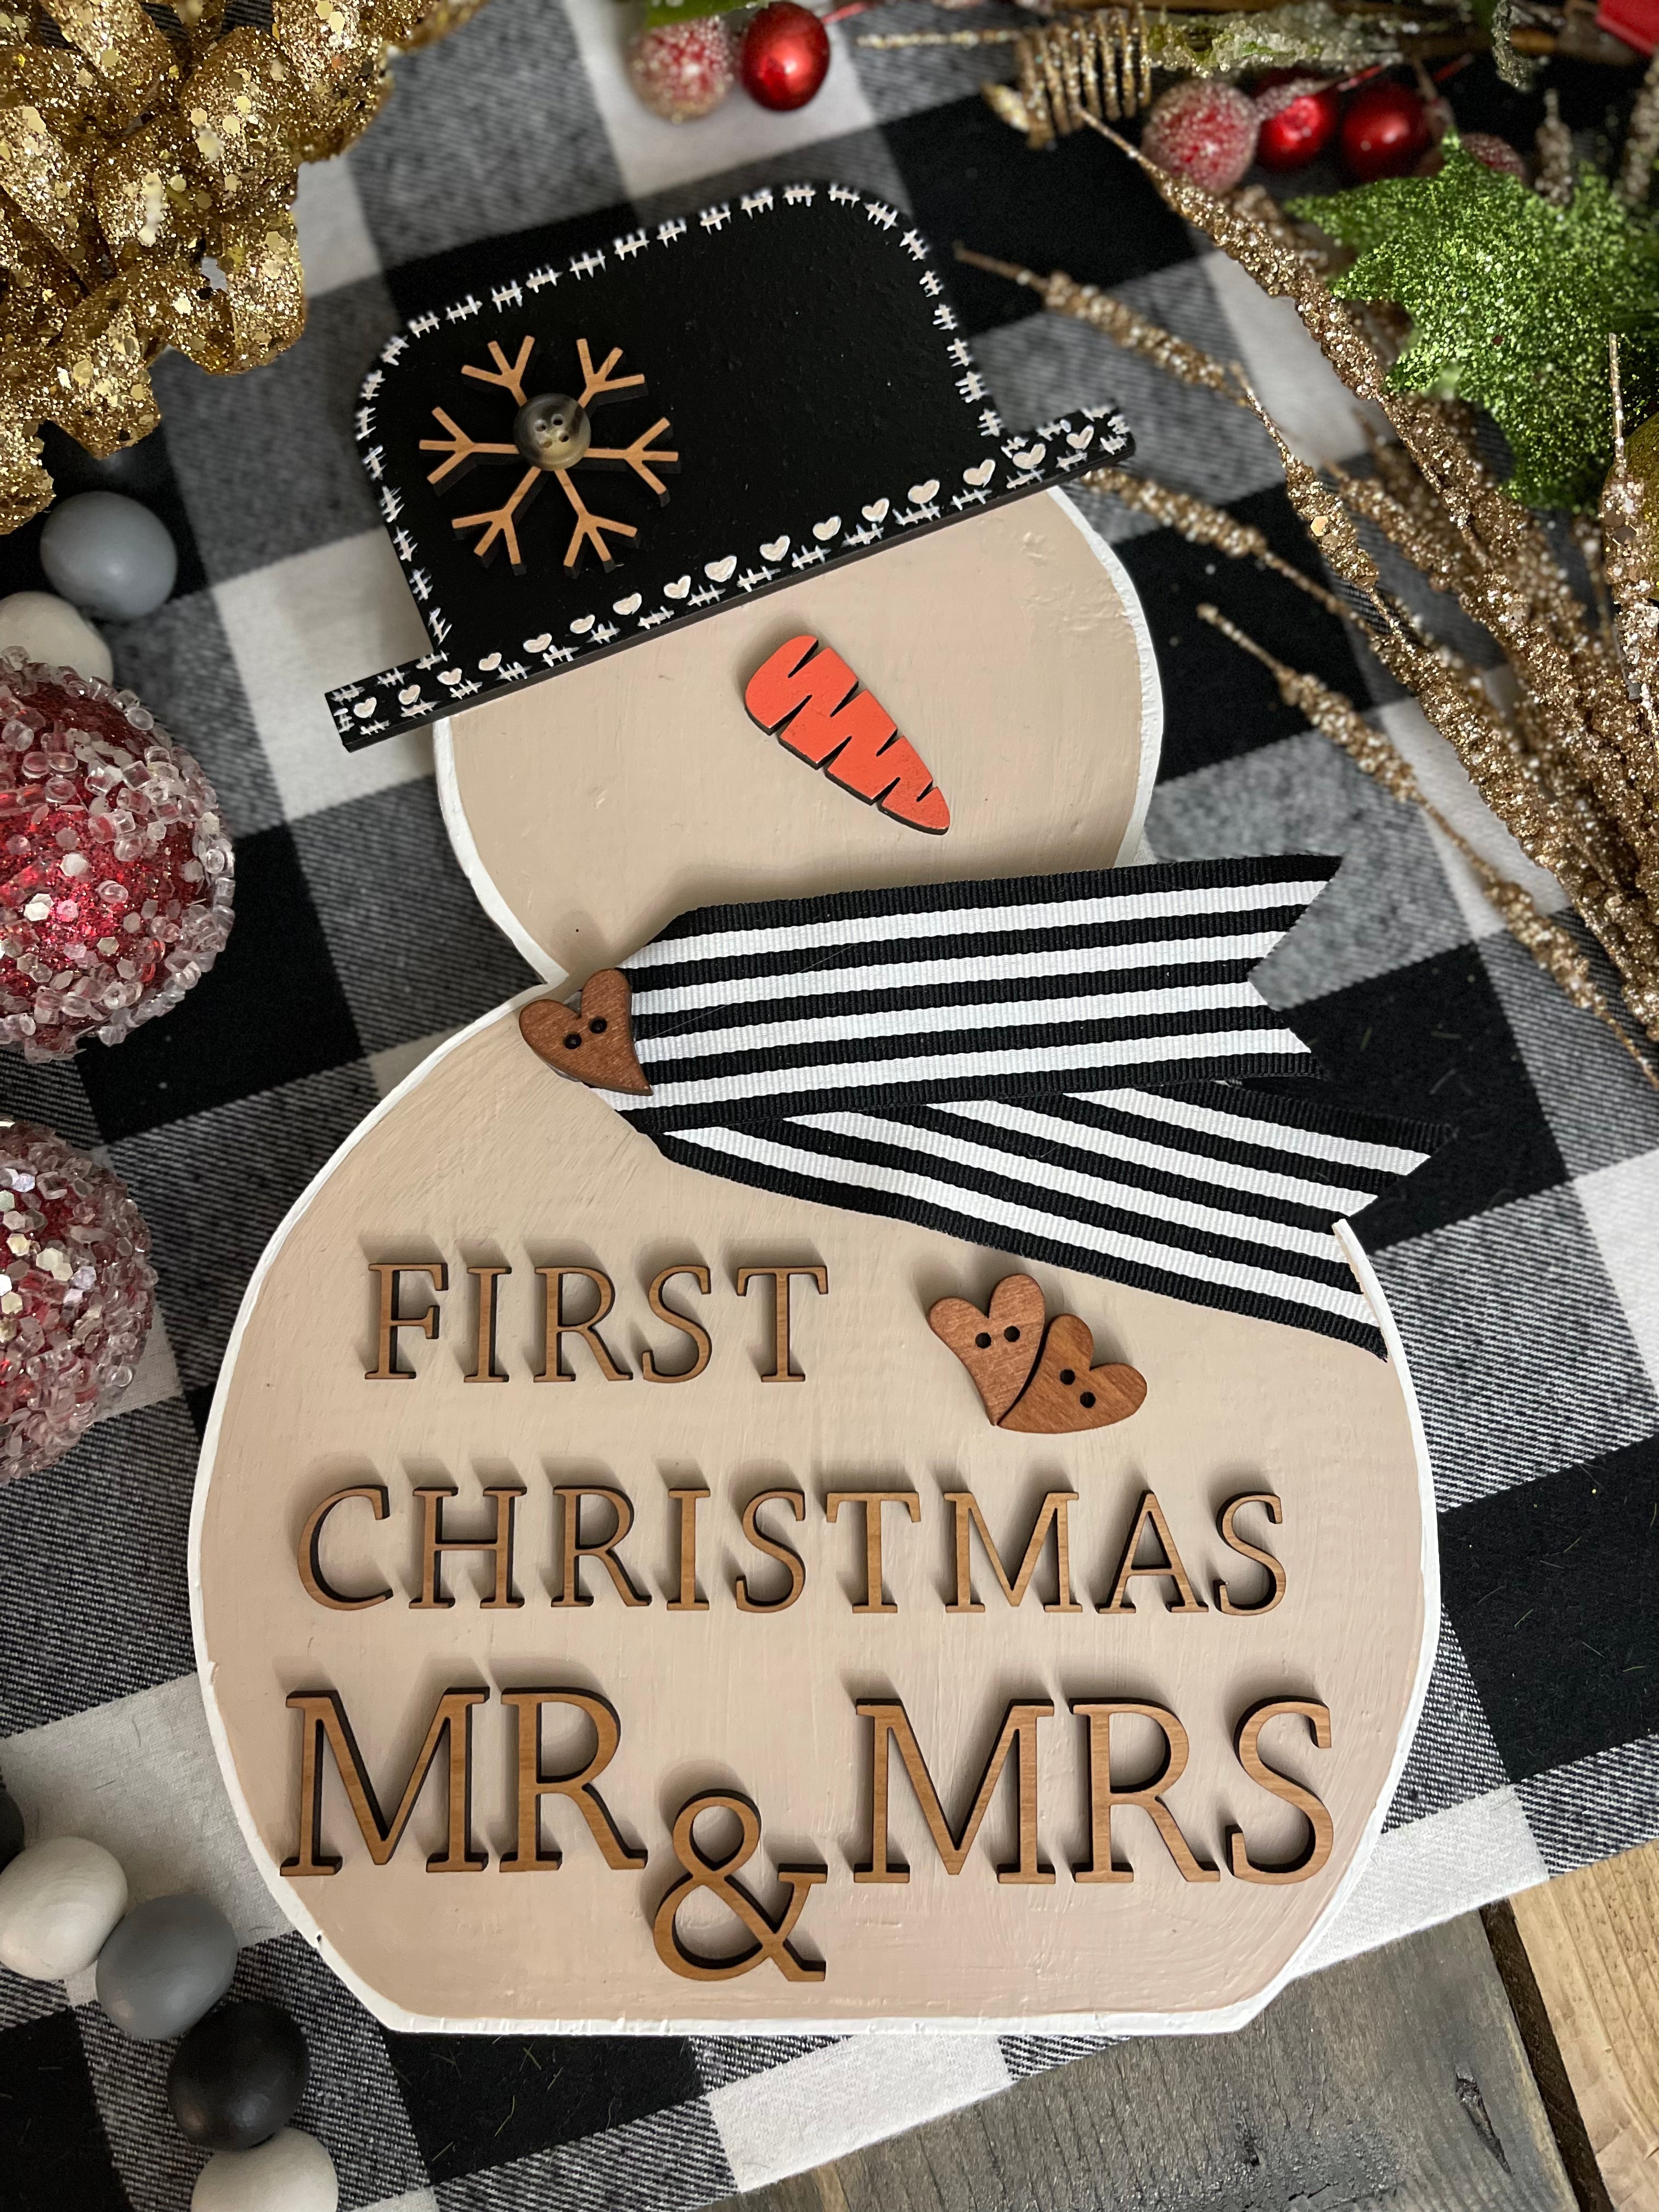 This image shows the large tan snowman that says First Christmas Mr. & Mrs.